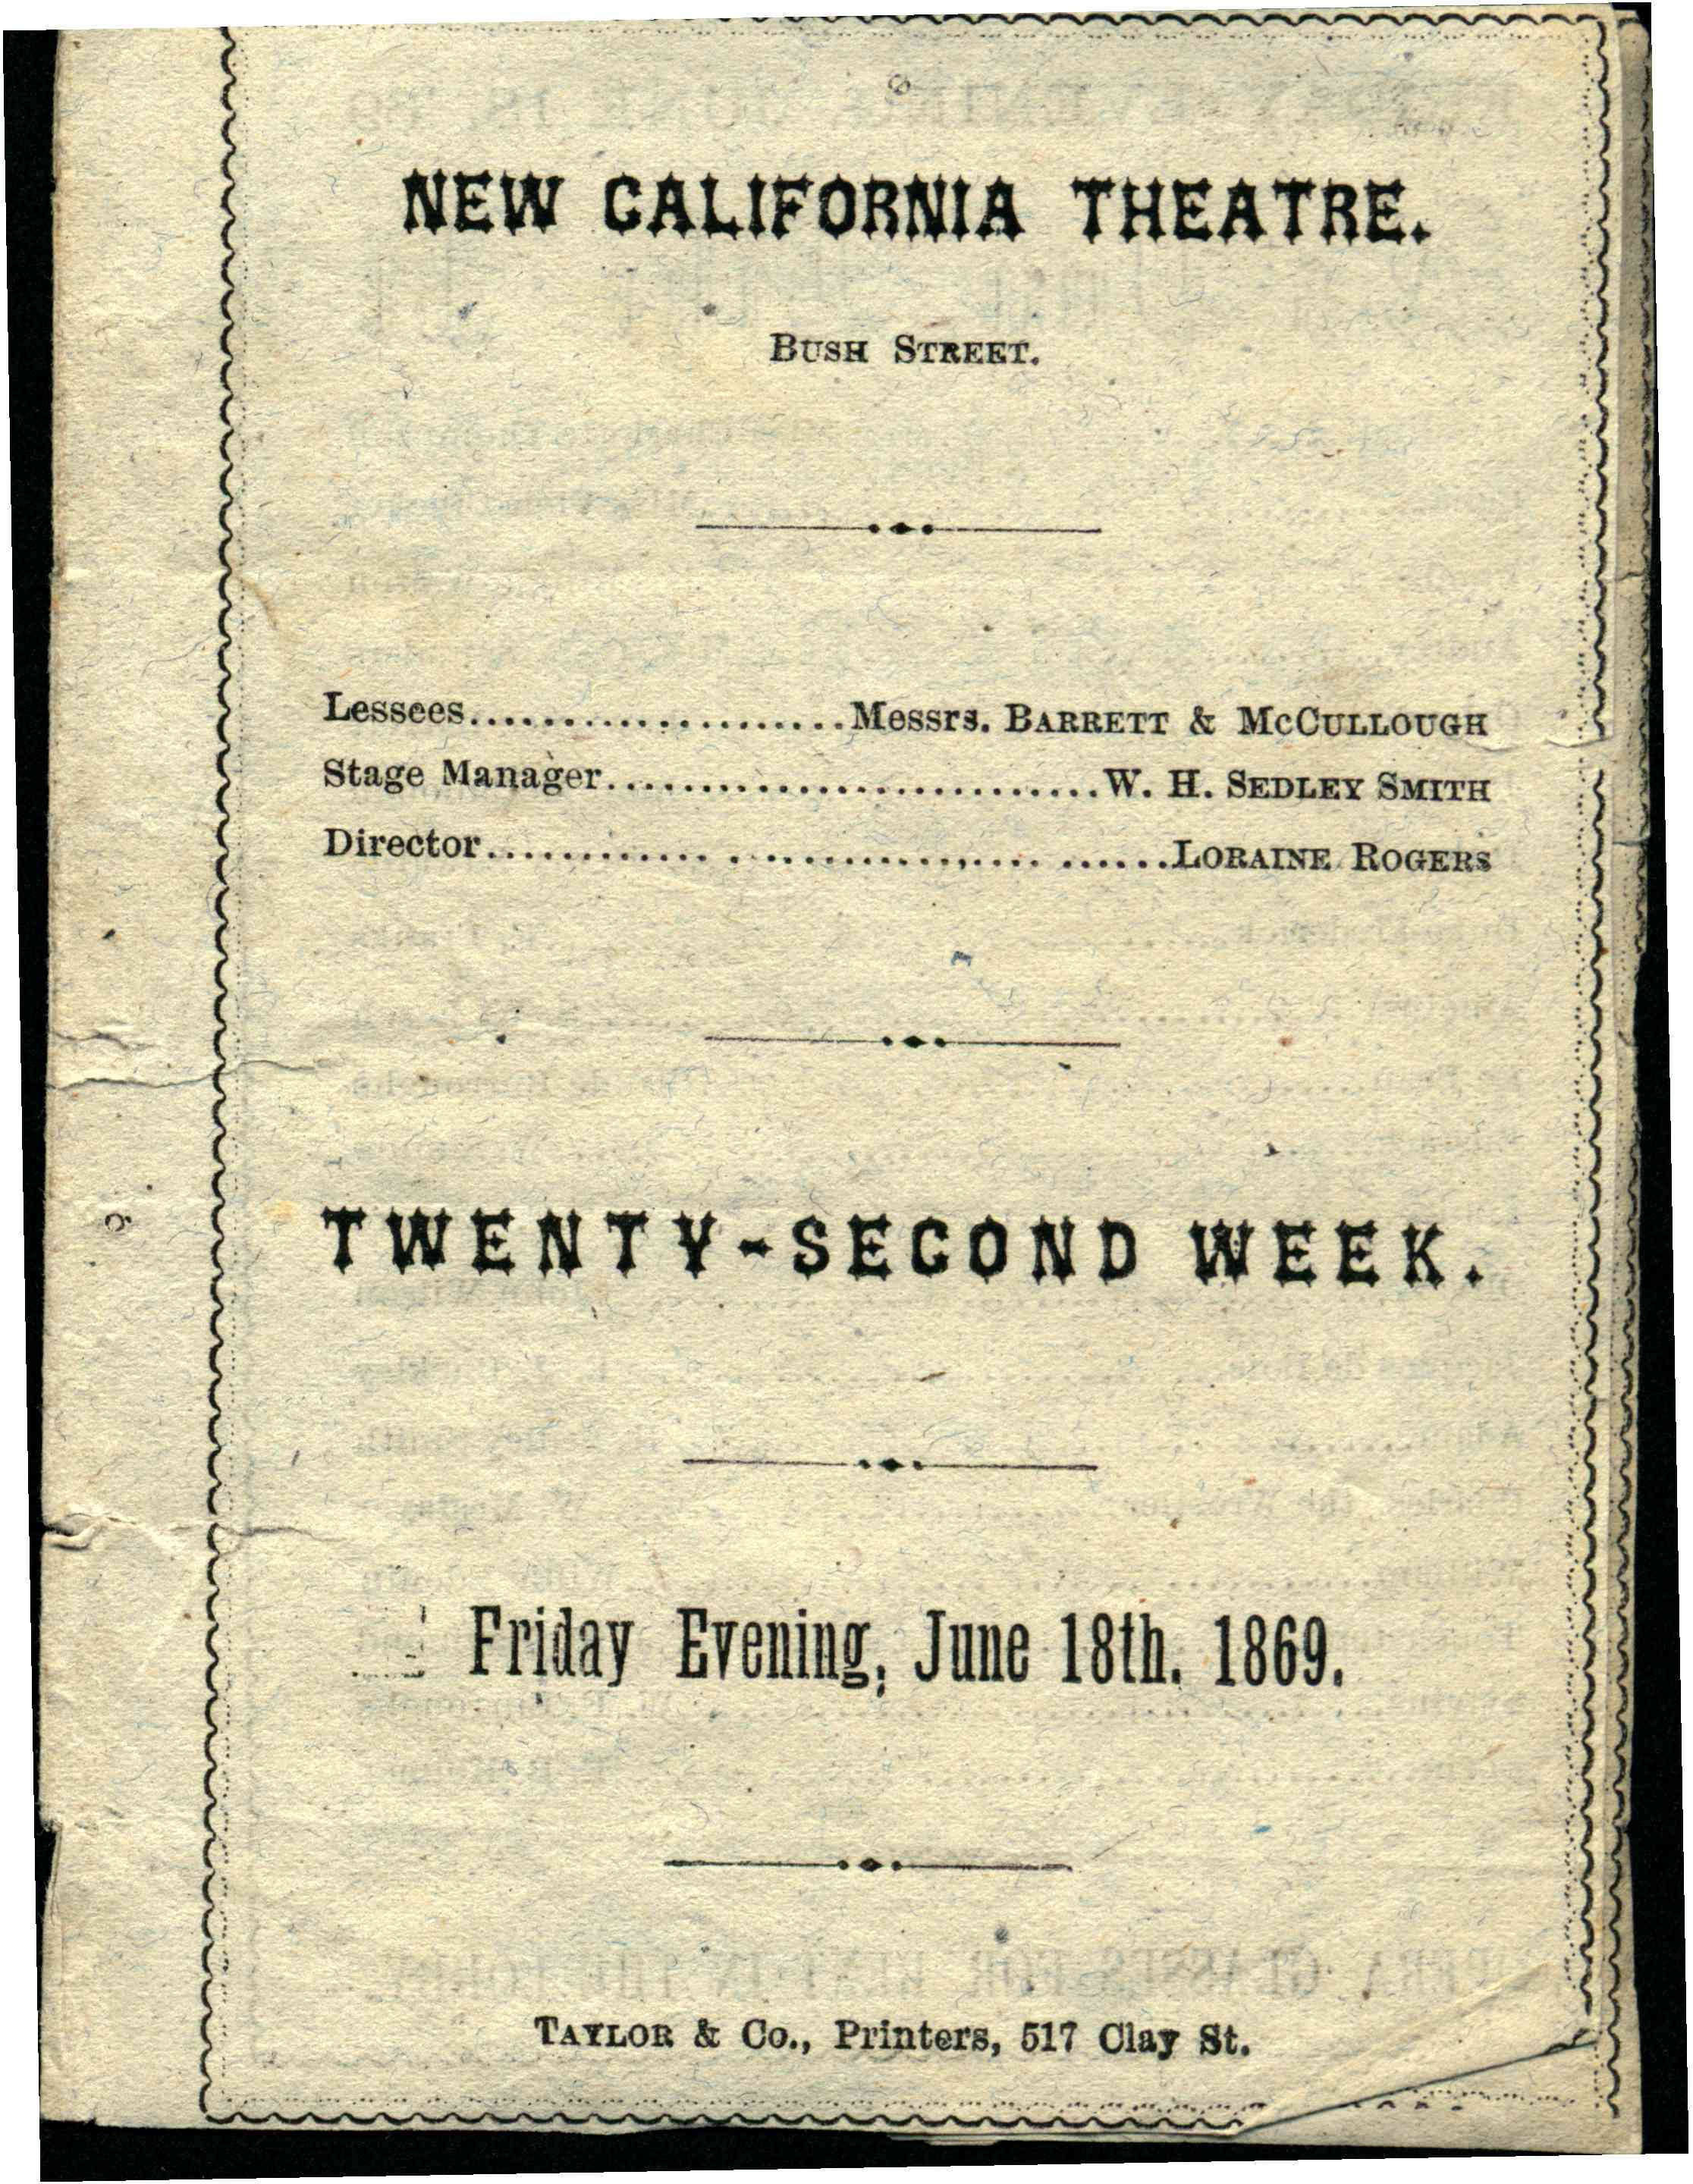 Front cover shows theatre information